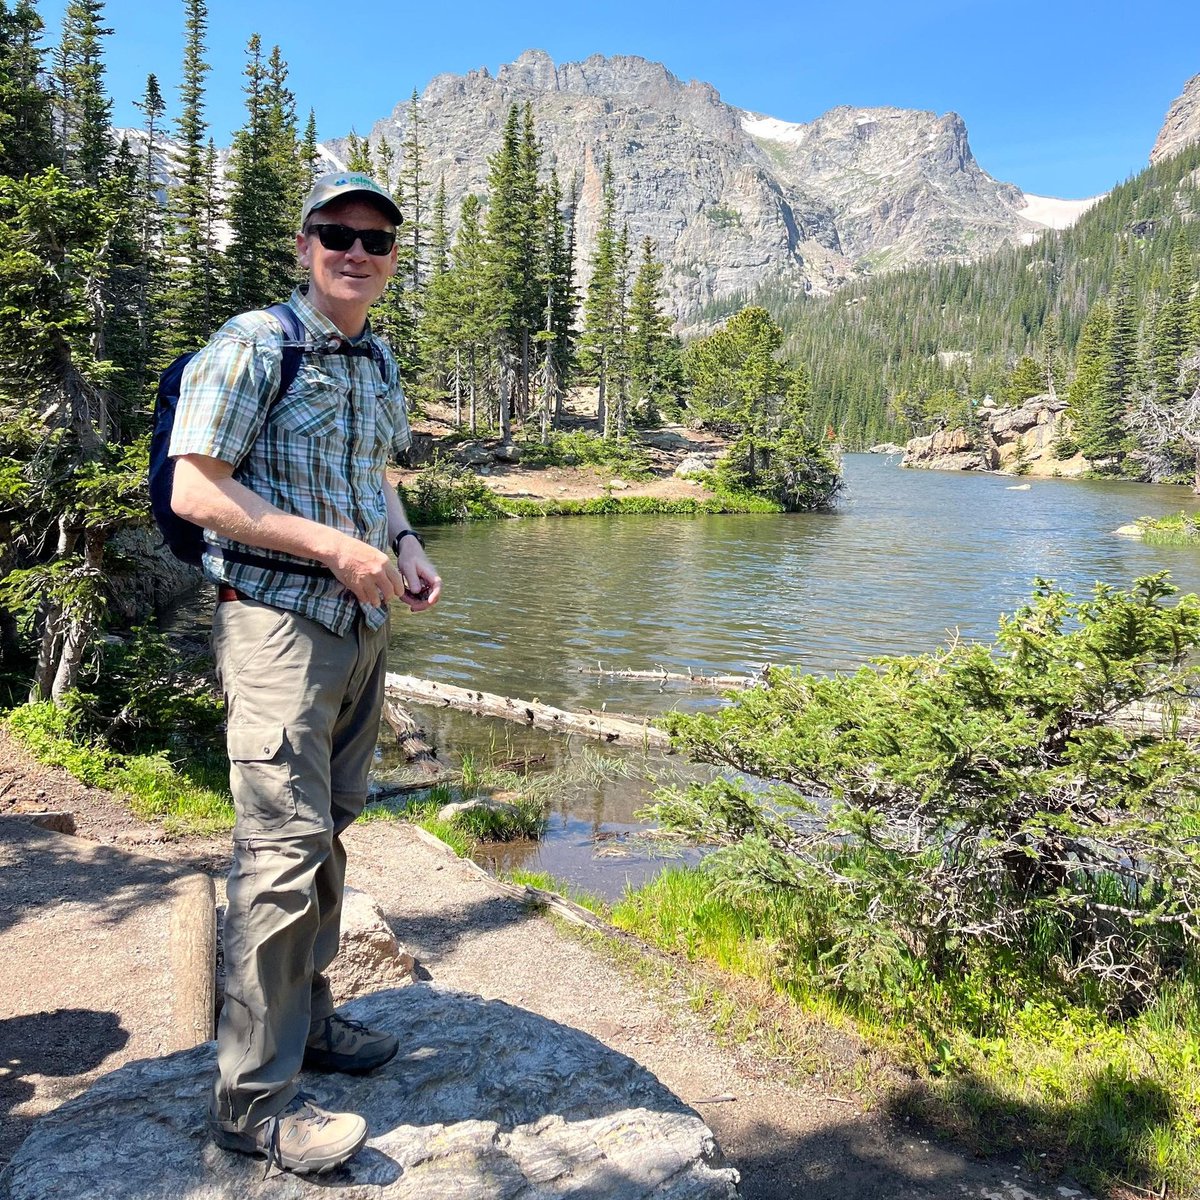 In 2022, I worked to designate Camp Hale as a national monument, and in the process we protected more than 50,000 acres of public lands. Now, I'm working to pass the CORE Act, which would protect nearly 400,000 acres of our public lands. Happy 🌎 Day. Our work continues.